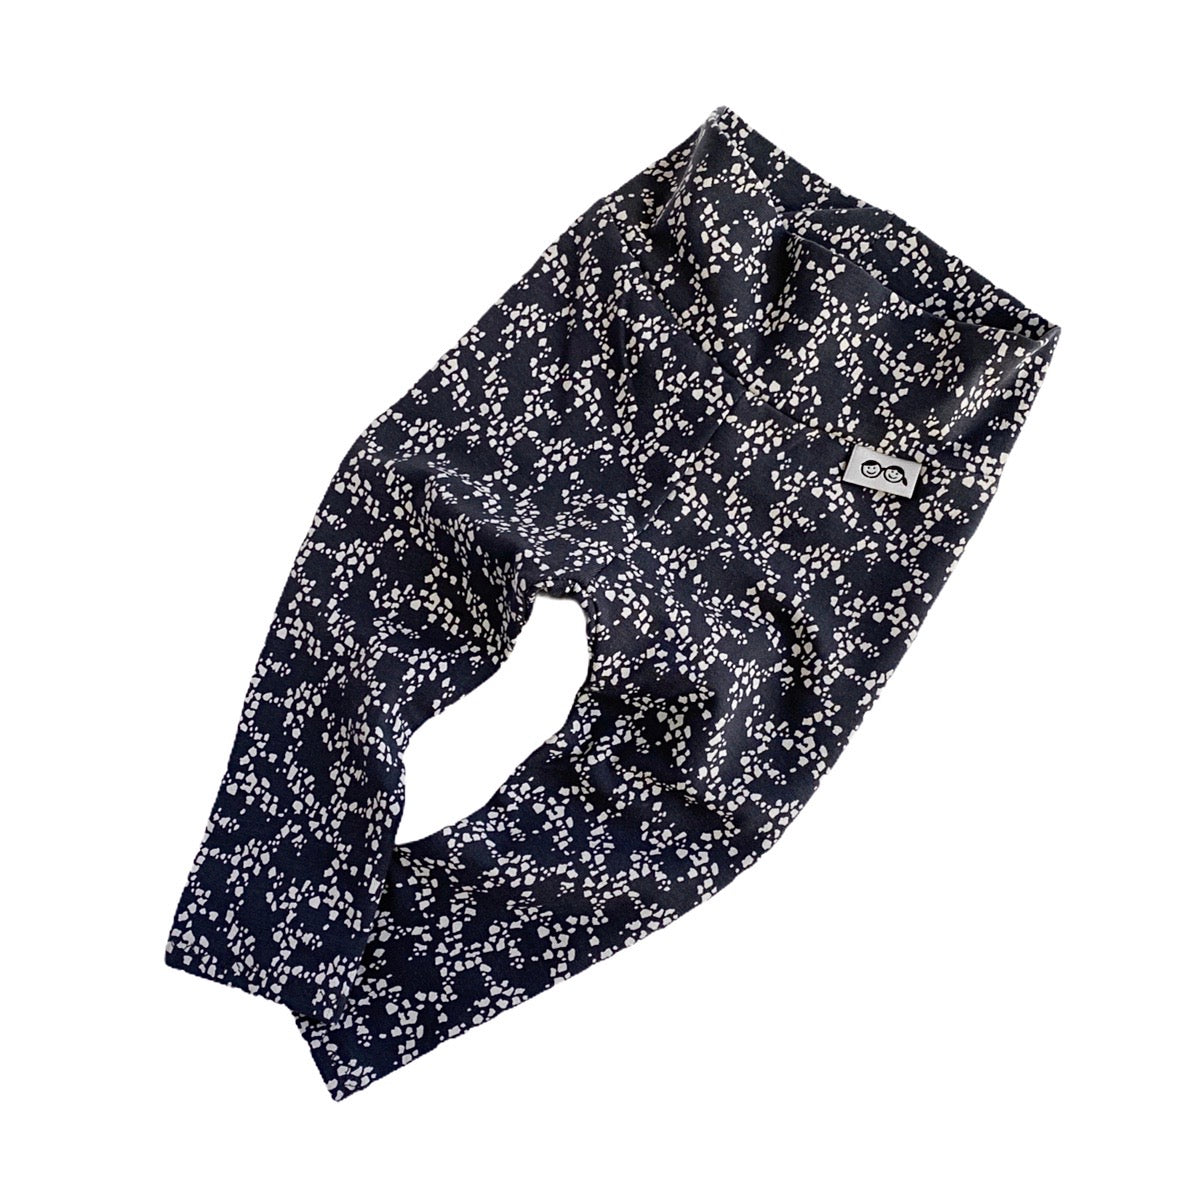 Messy Dots on Charcoal Leggings and/or Headbands